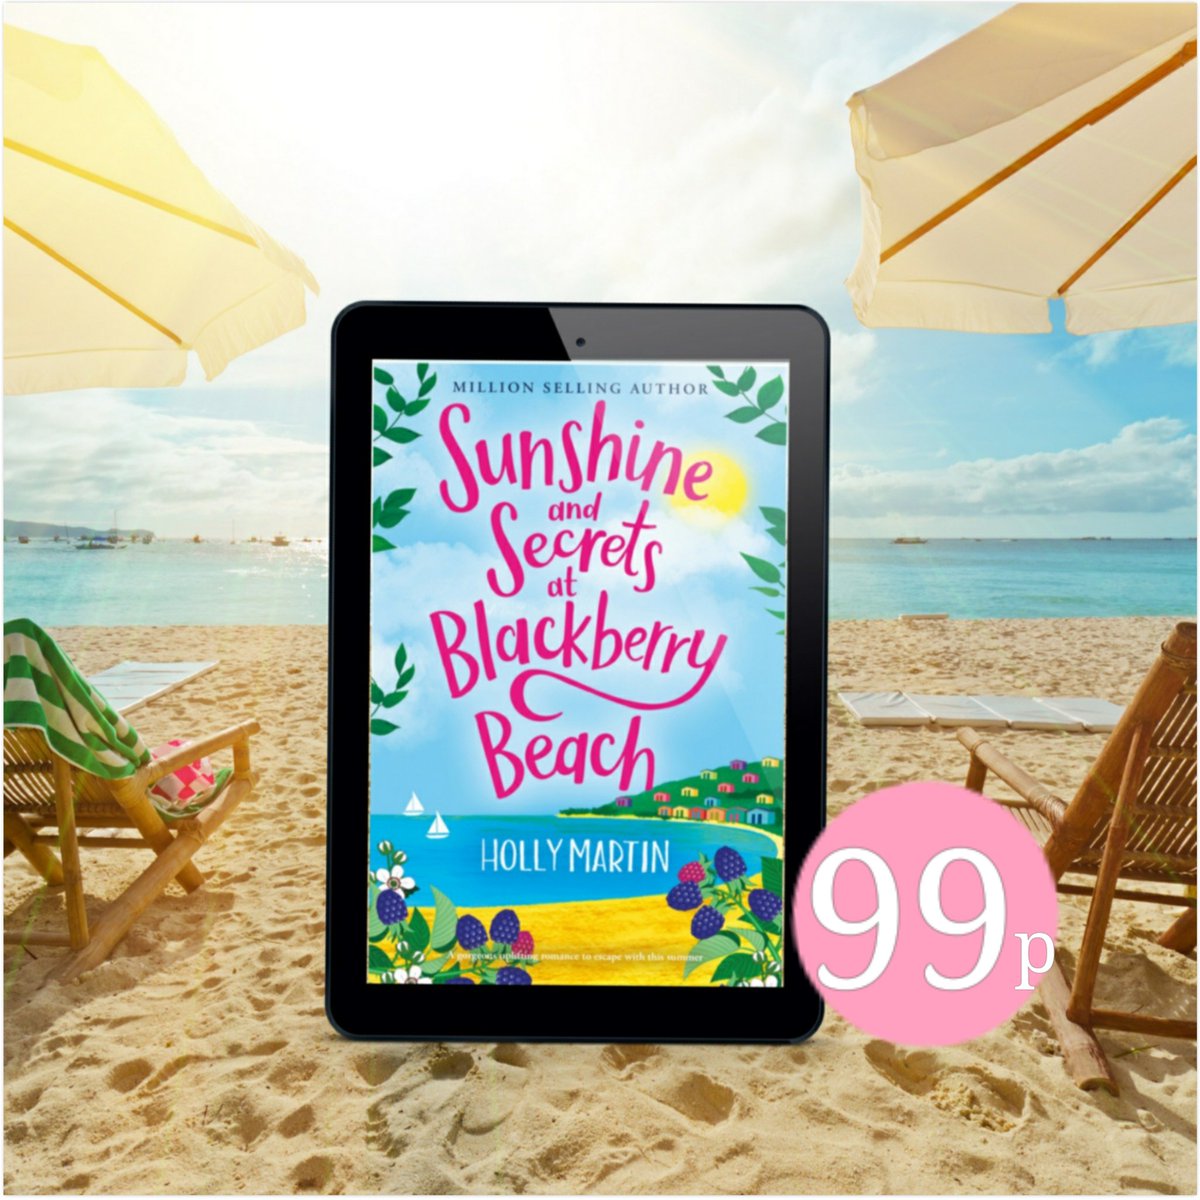 Sunshine and Secrets at Blackberry Beach, Book 1 in the Apple Hill Bay series, is ONLY 99p, but just for today!! Grab yourself a sunshiney bargain today geni.us/BlackberryBeach